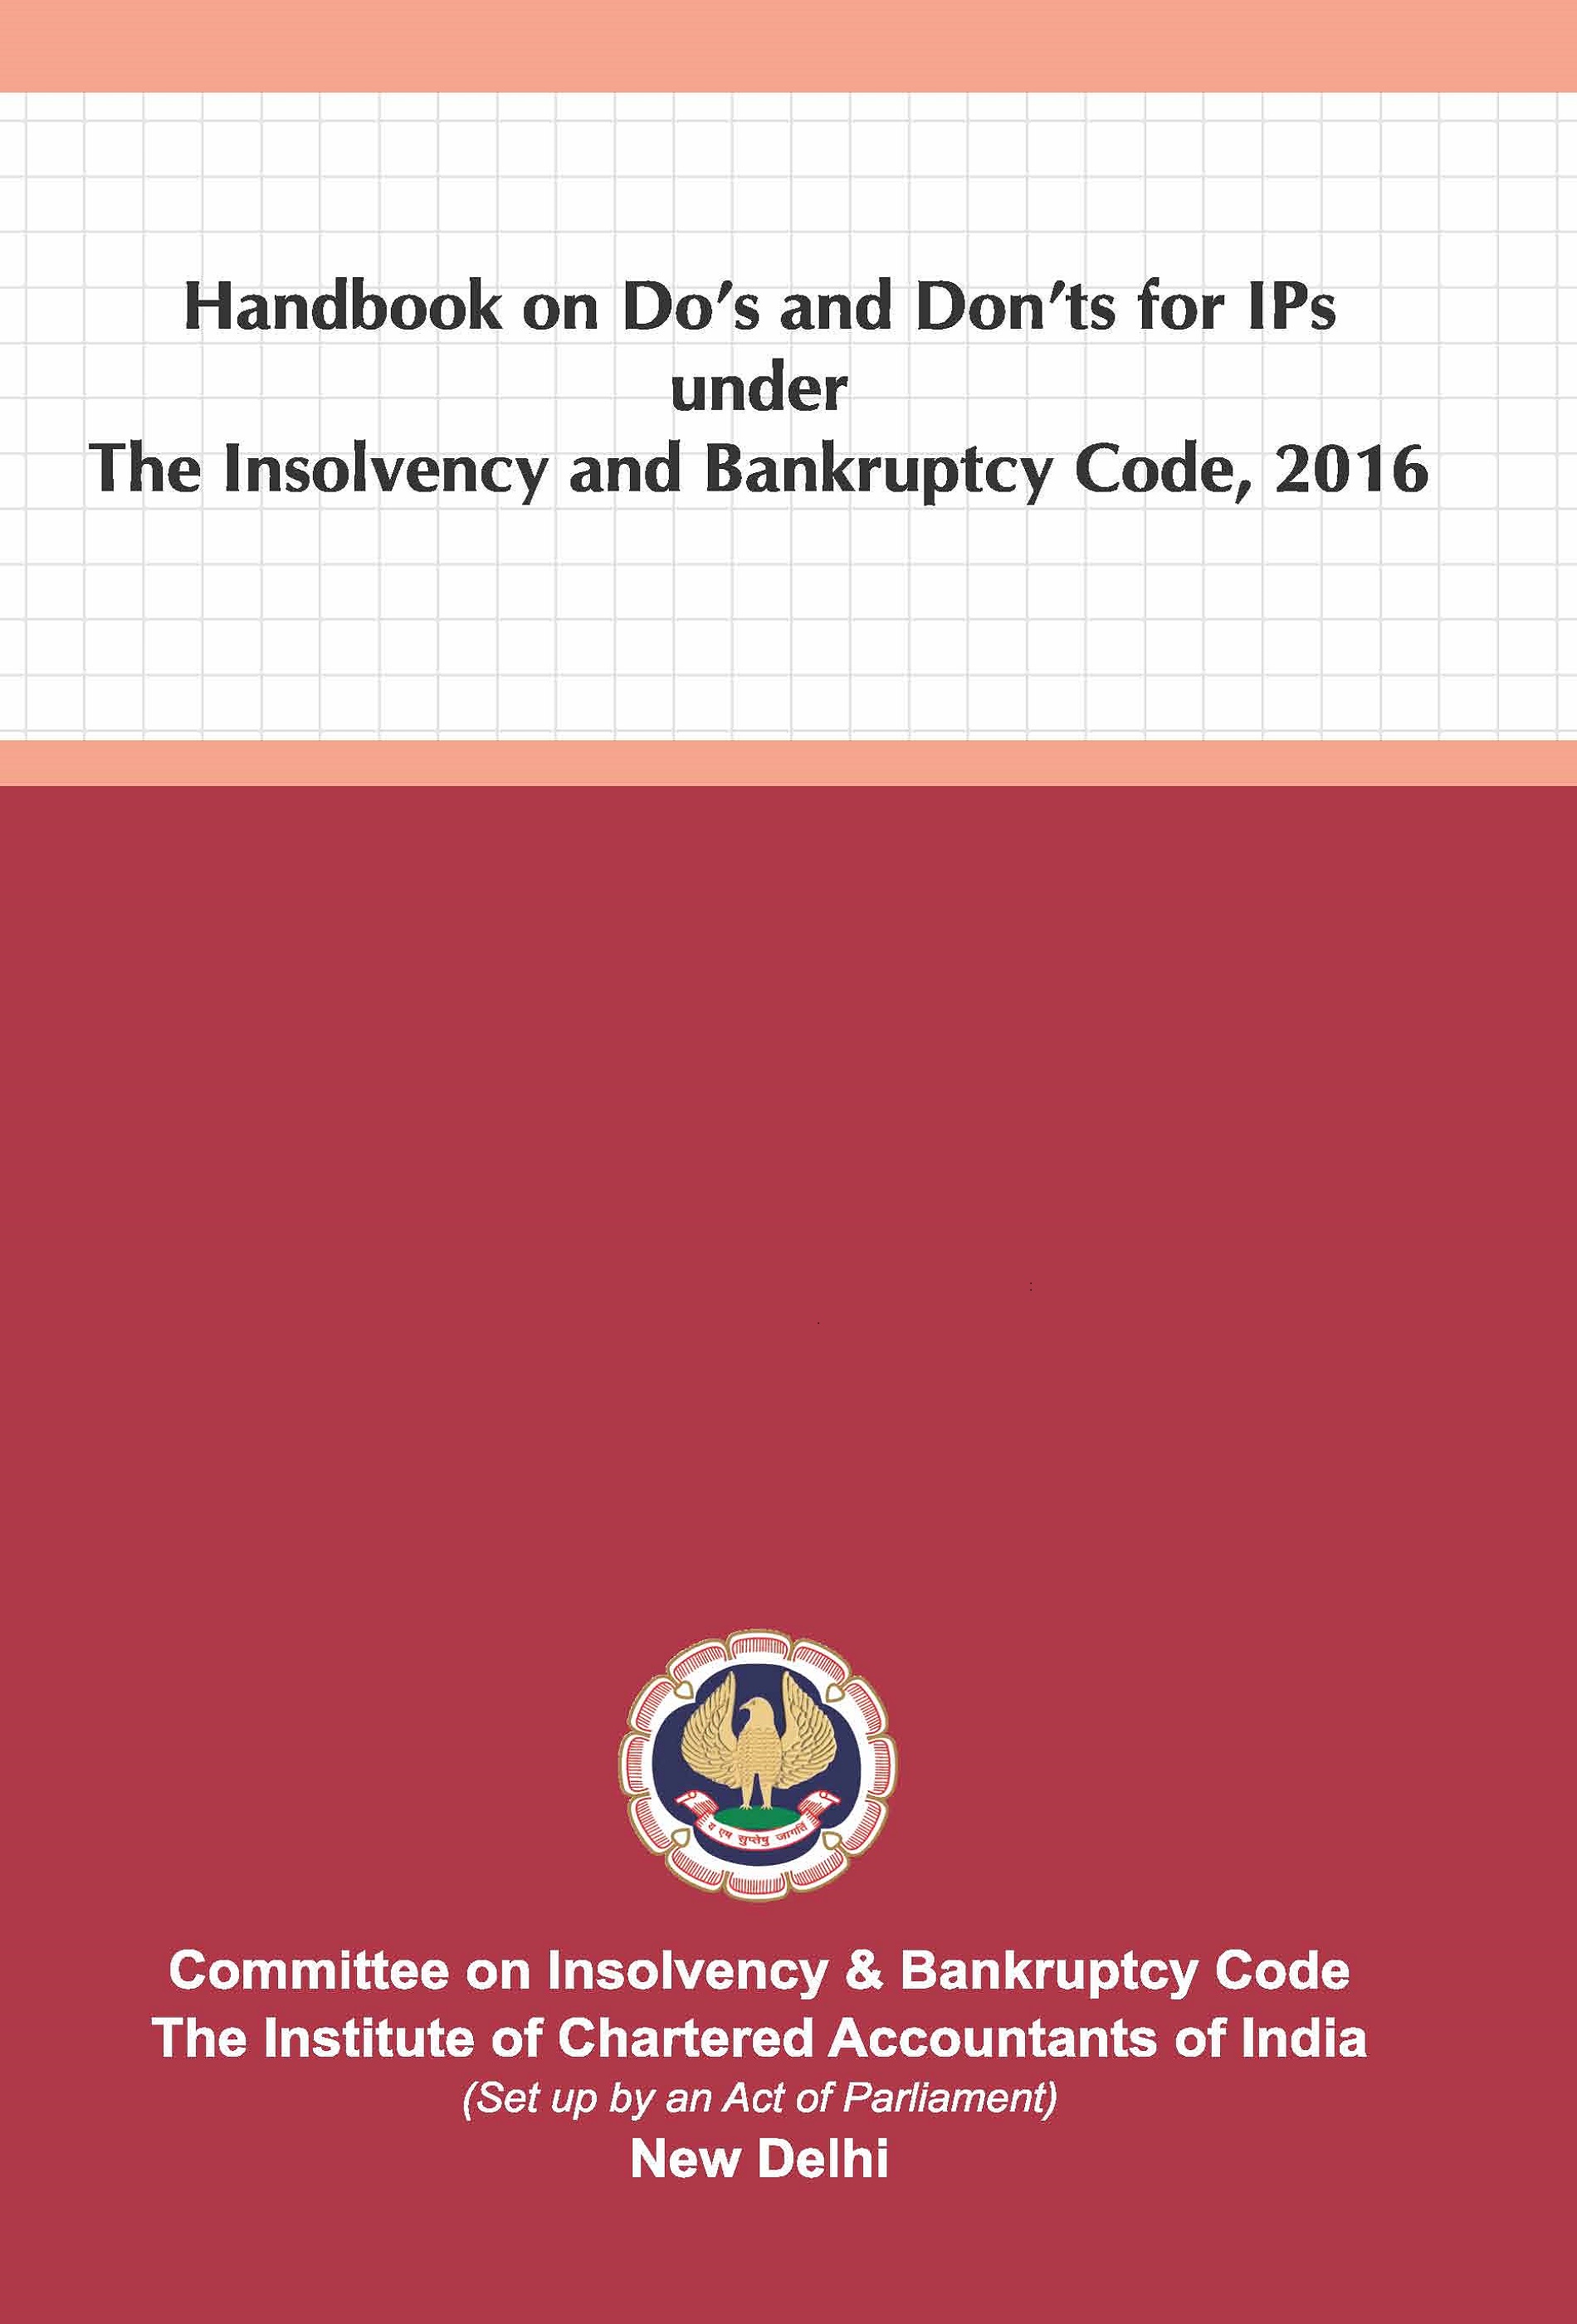 Handbook on Do's and Don'ts for IPs under The Insolvency and Bankruptcy Code, 2016 (June, 2021)